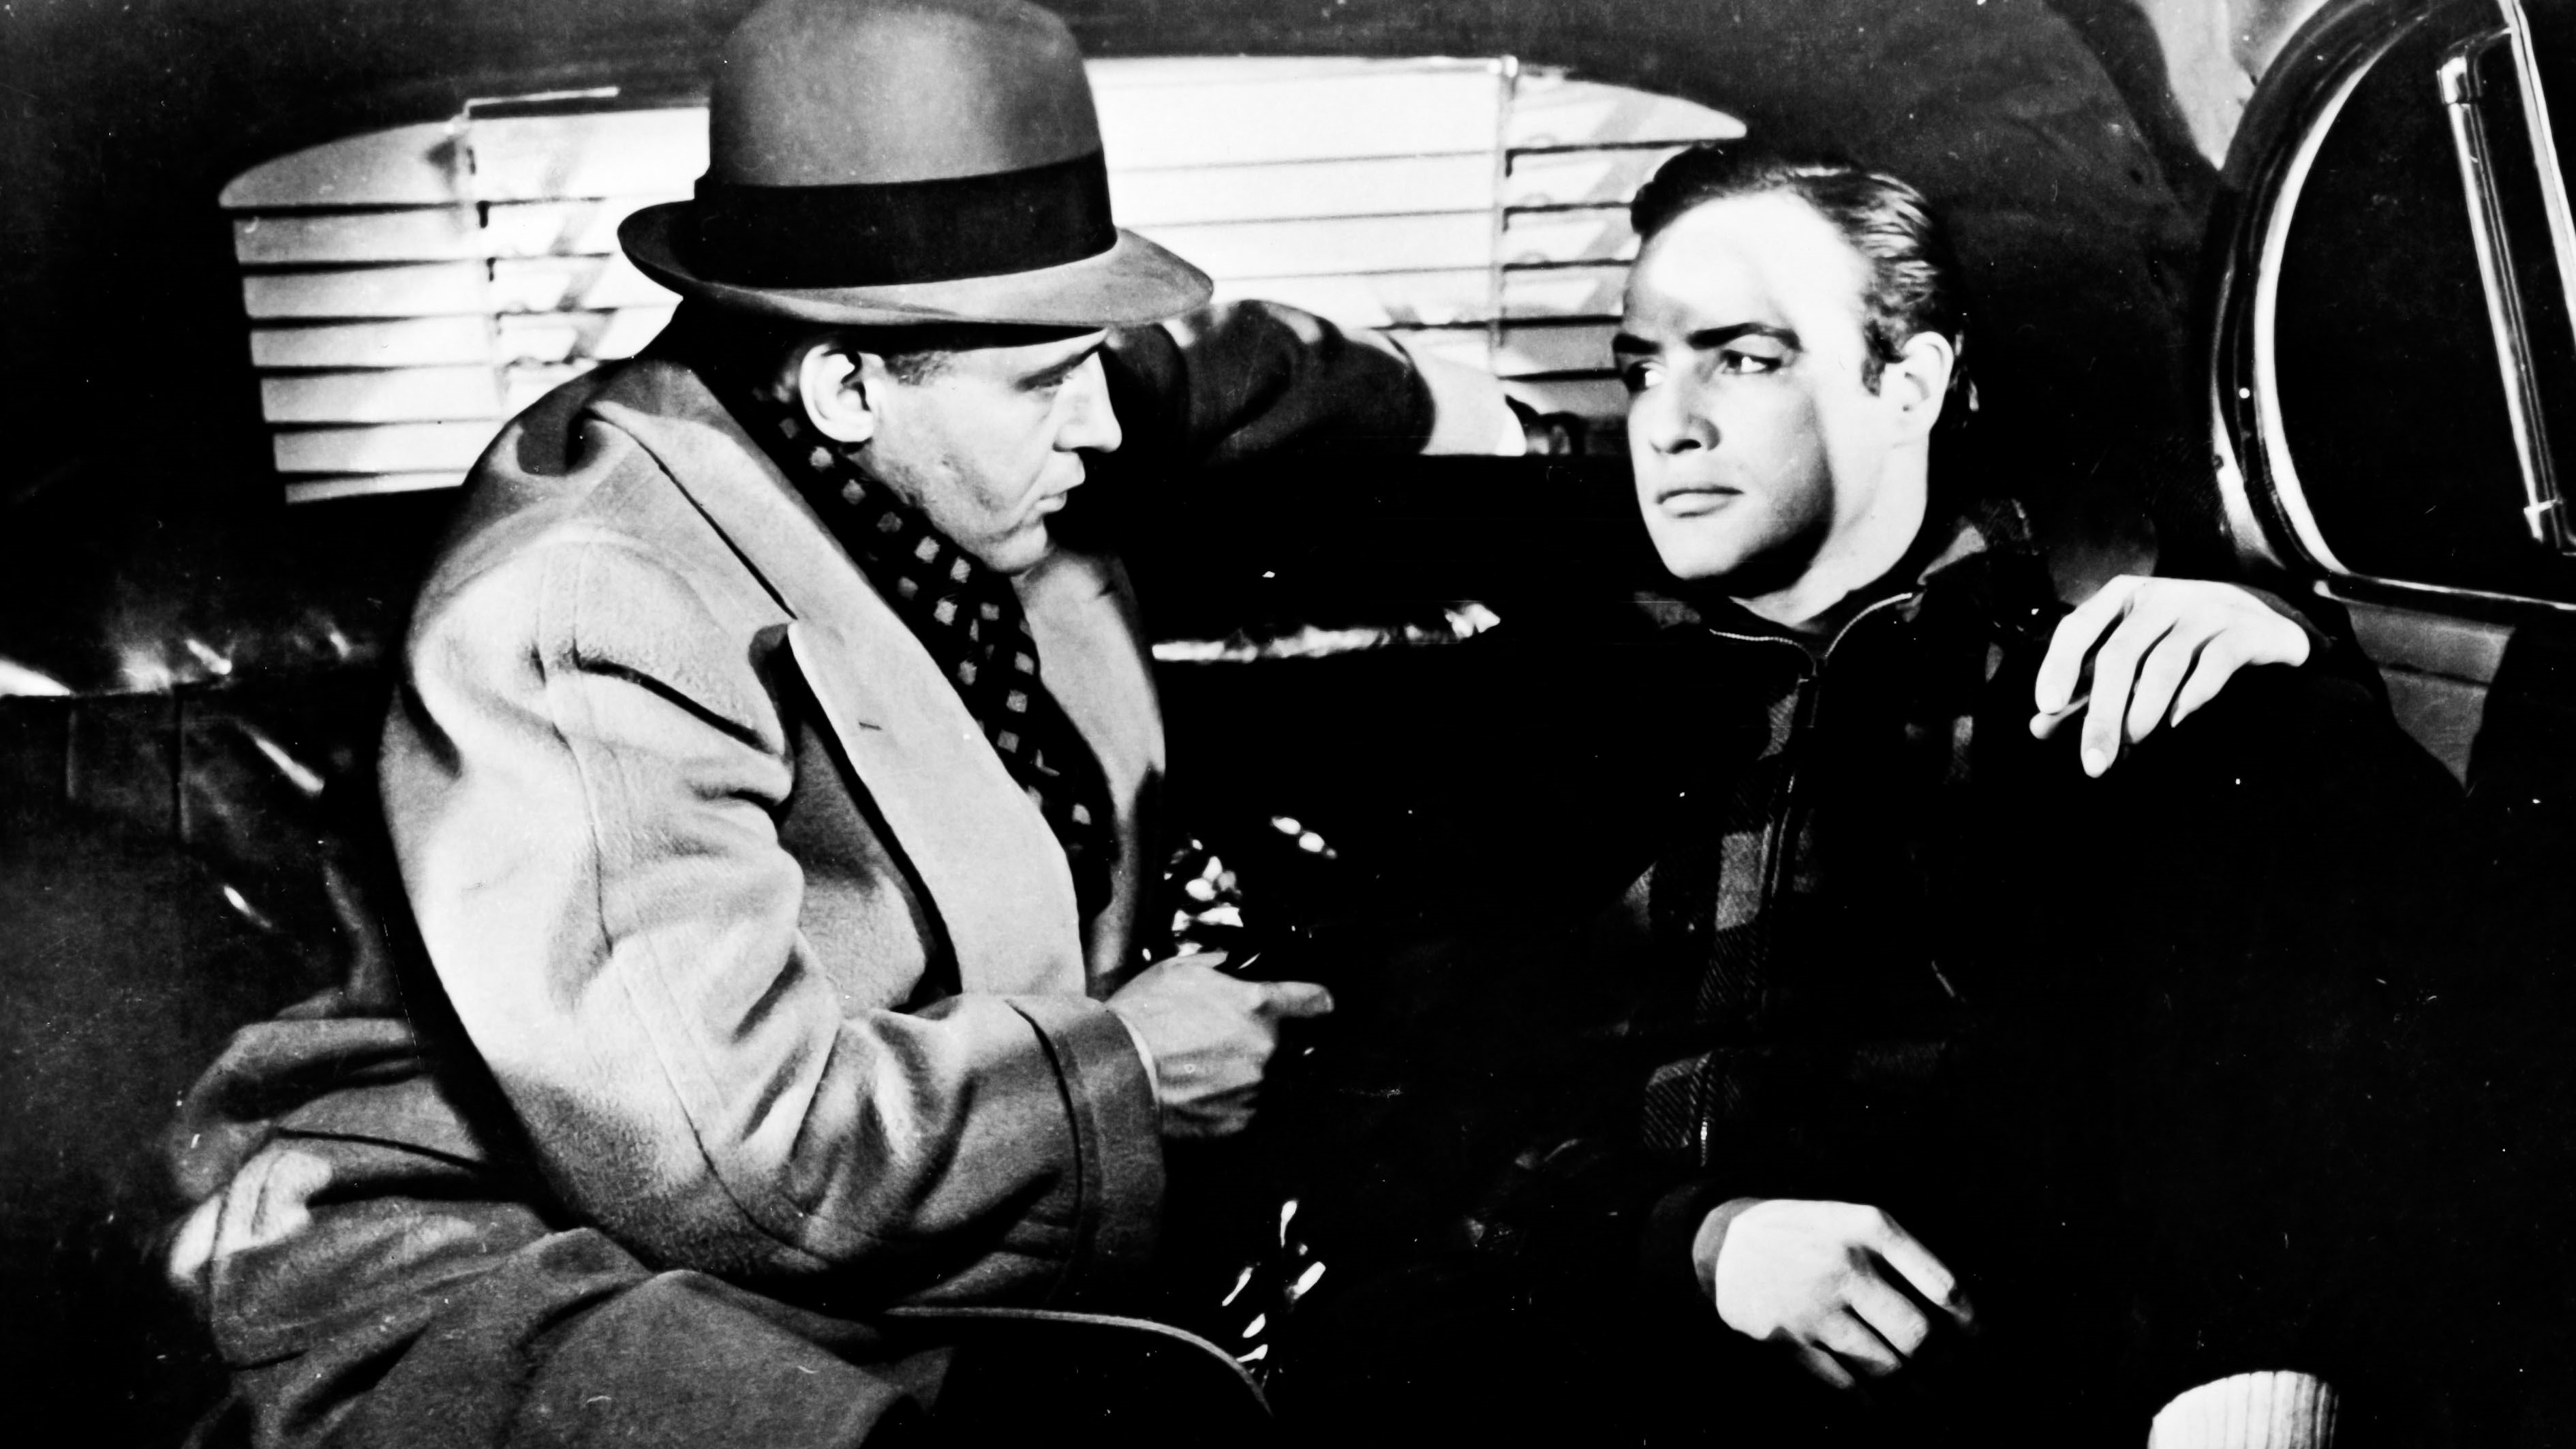 Rod Steiger and Marlon Brando in On the Waterfront